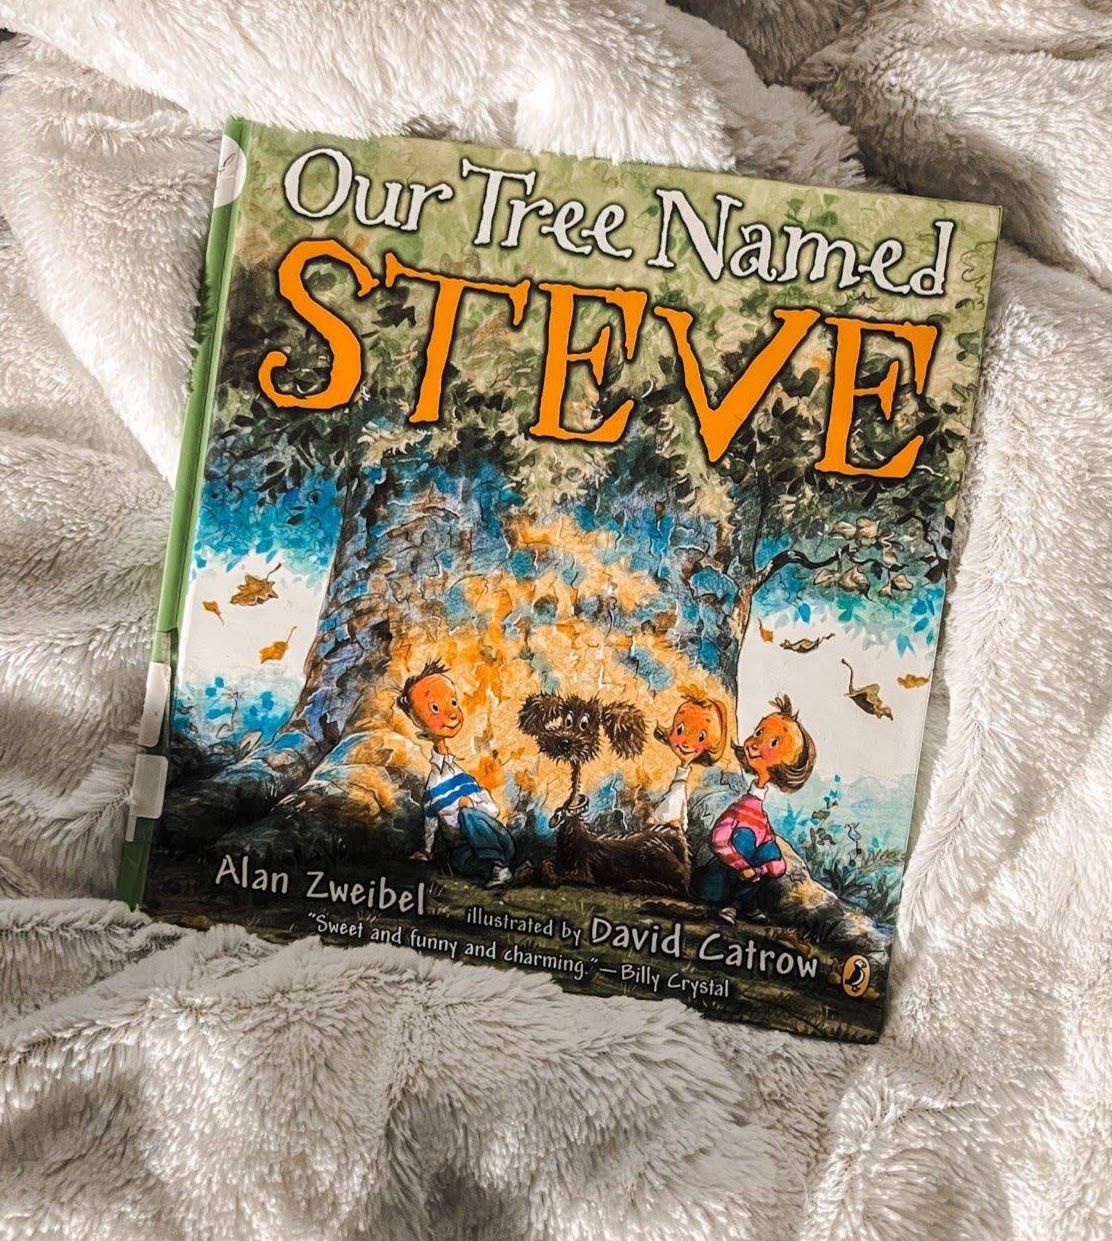 Picture Book. Our Tree Named Steve by Alan Zweibel. Illustrated by David Catrow